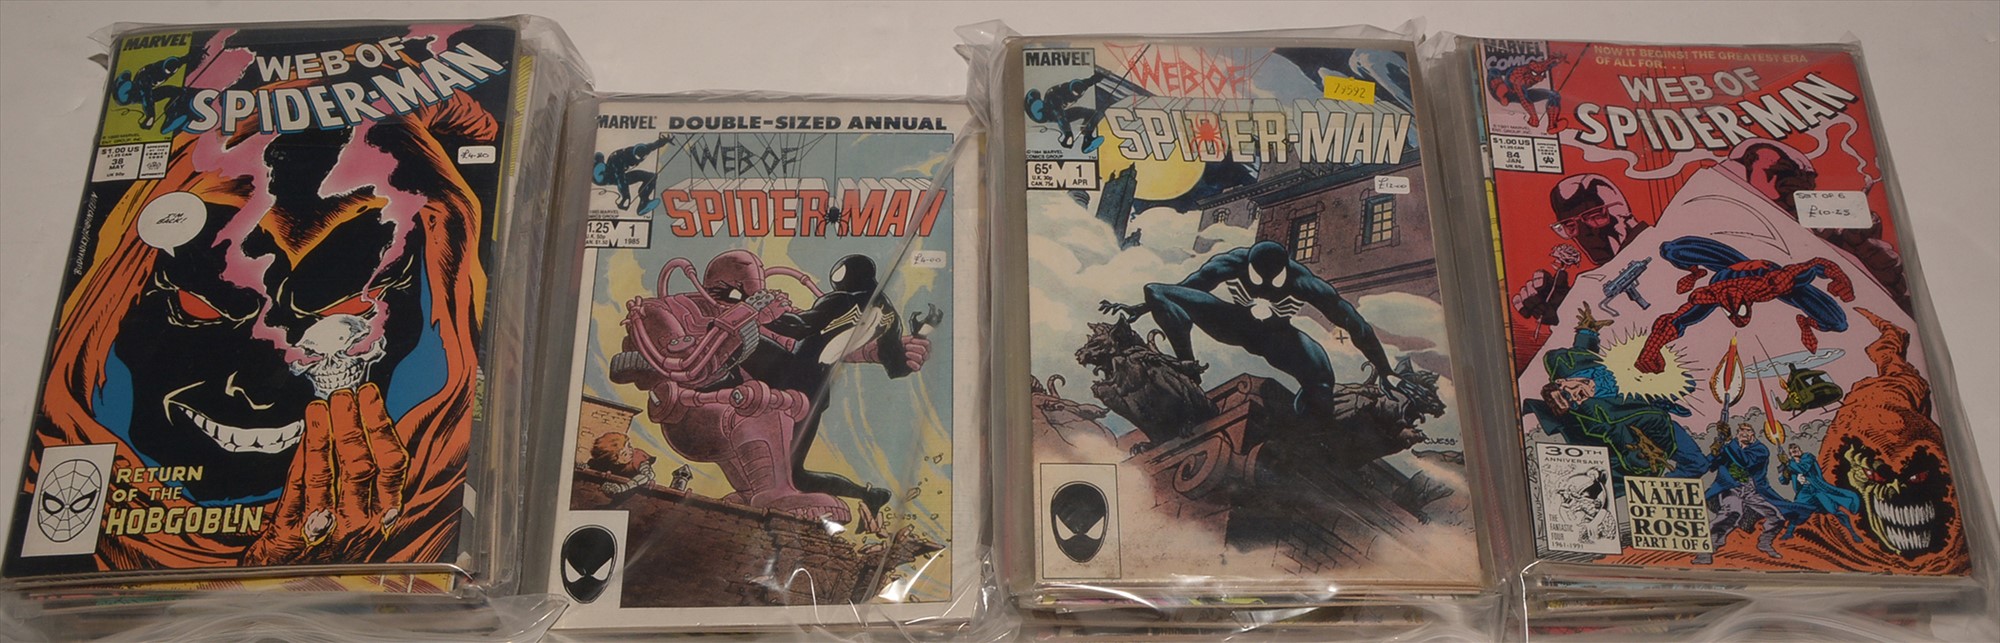 Web of Spider-Man No's. 1, 2, 3, 4, 6 and a large quantity of subsequent issues, highest number 125,